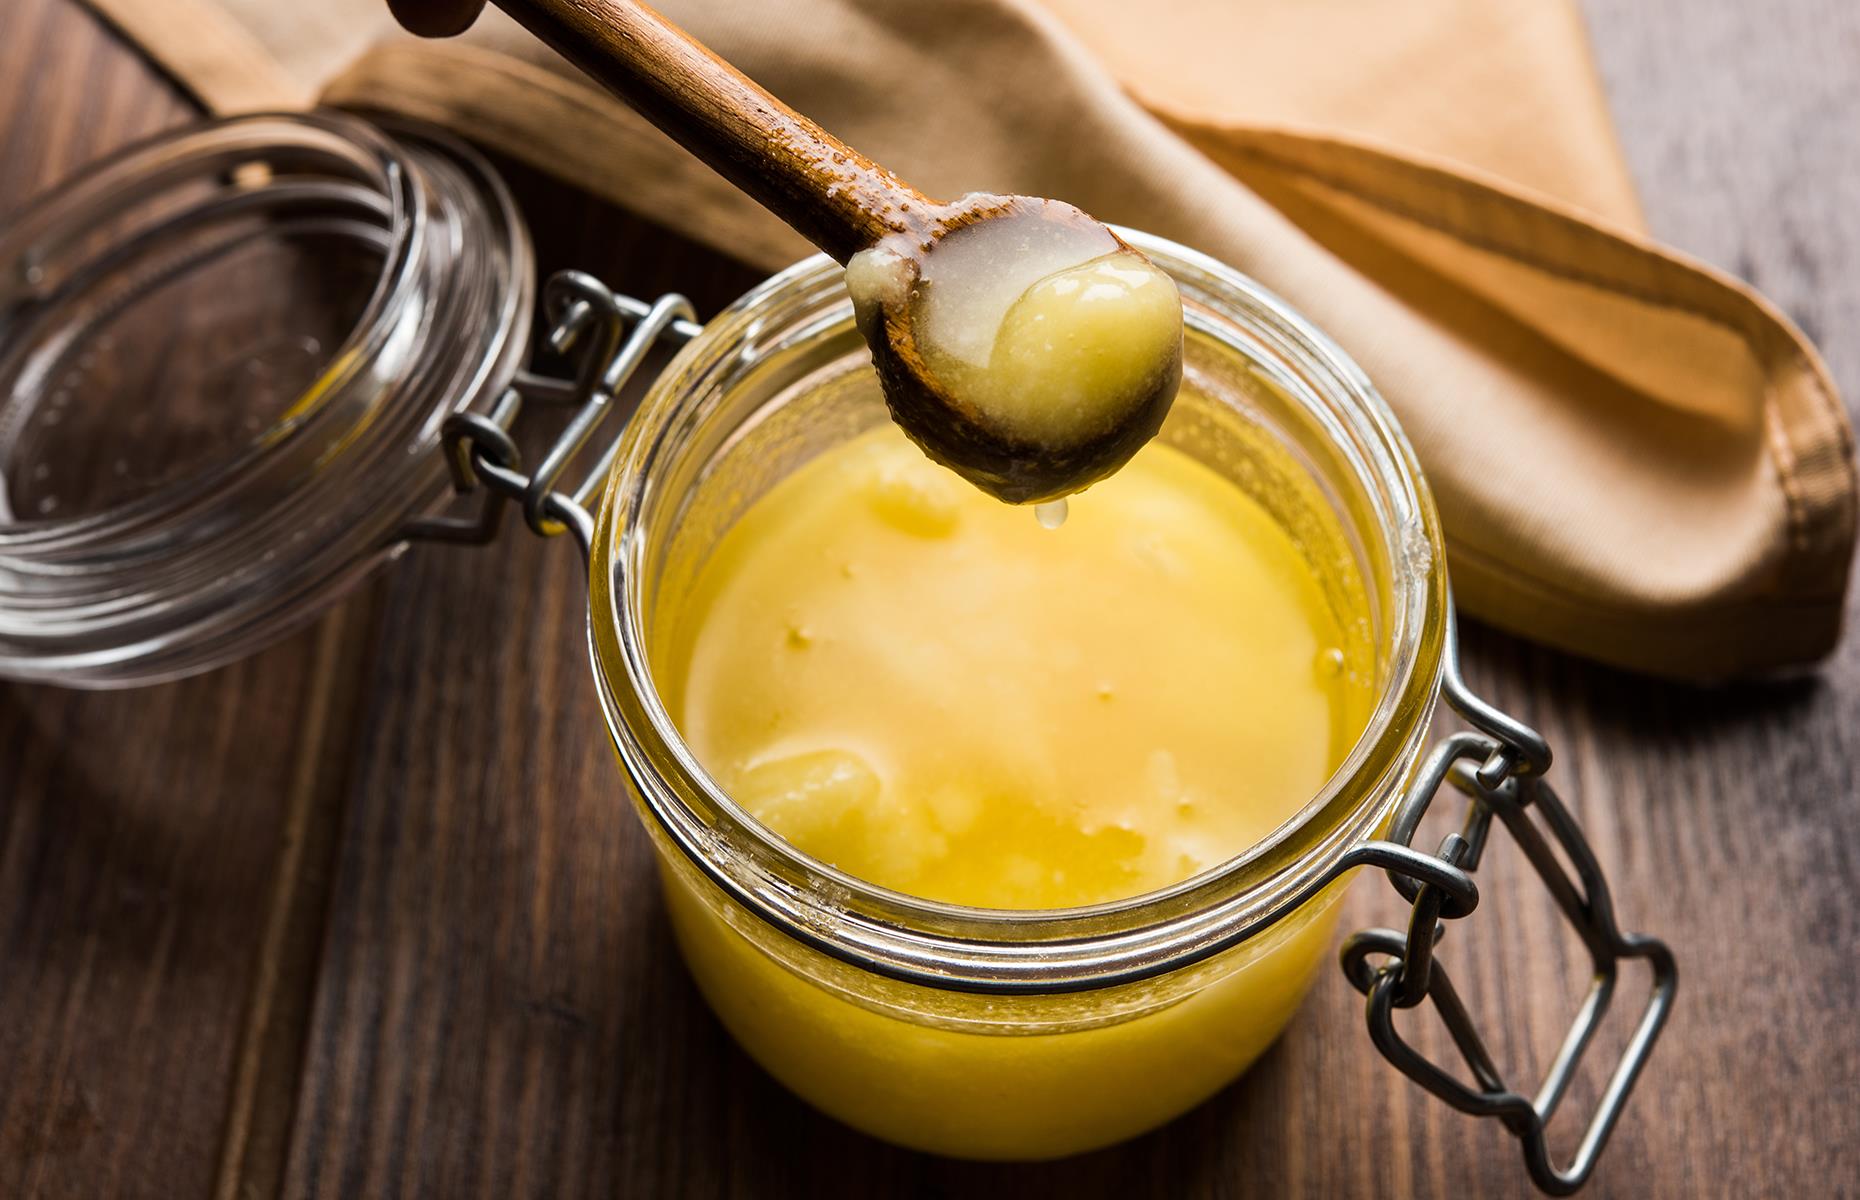 <p>A mainstay in modern Indian cooking, ghee is a thick, clarified butter known for its deliciously nutty flavour. In recent years, it's also become favoured by followers of the typically grain-free, paleo diet, who wax lyrical about its role as a nutritious fat source. But its roots <a href="https://www.washingtonpost.com/news/voraciously/wp/2019/02/06/ghee-has-been-an-indian-staple-for-millennia-now-the-rest-of-the-world-is-catching-on/">go much deeper</a>. It originated in ancient India, with millennia-old Sanskrit texts hailing it as fit for the divine. It's also bound up with the Hindu religion, which says that deity Prajapati conjured the foodstuff himself.</p>